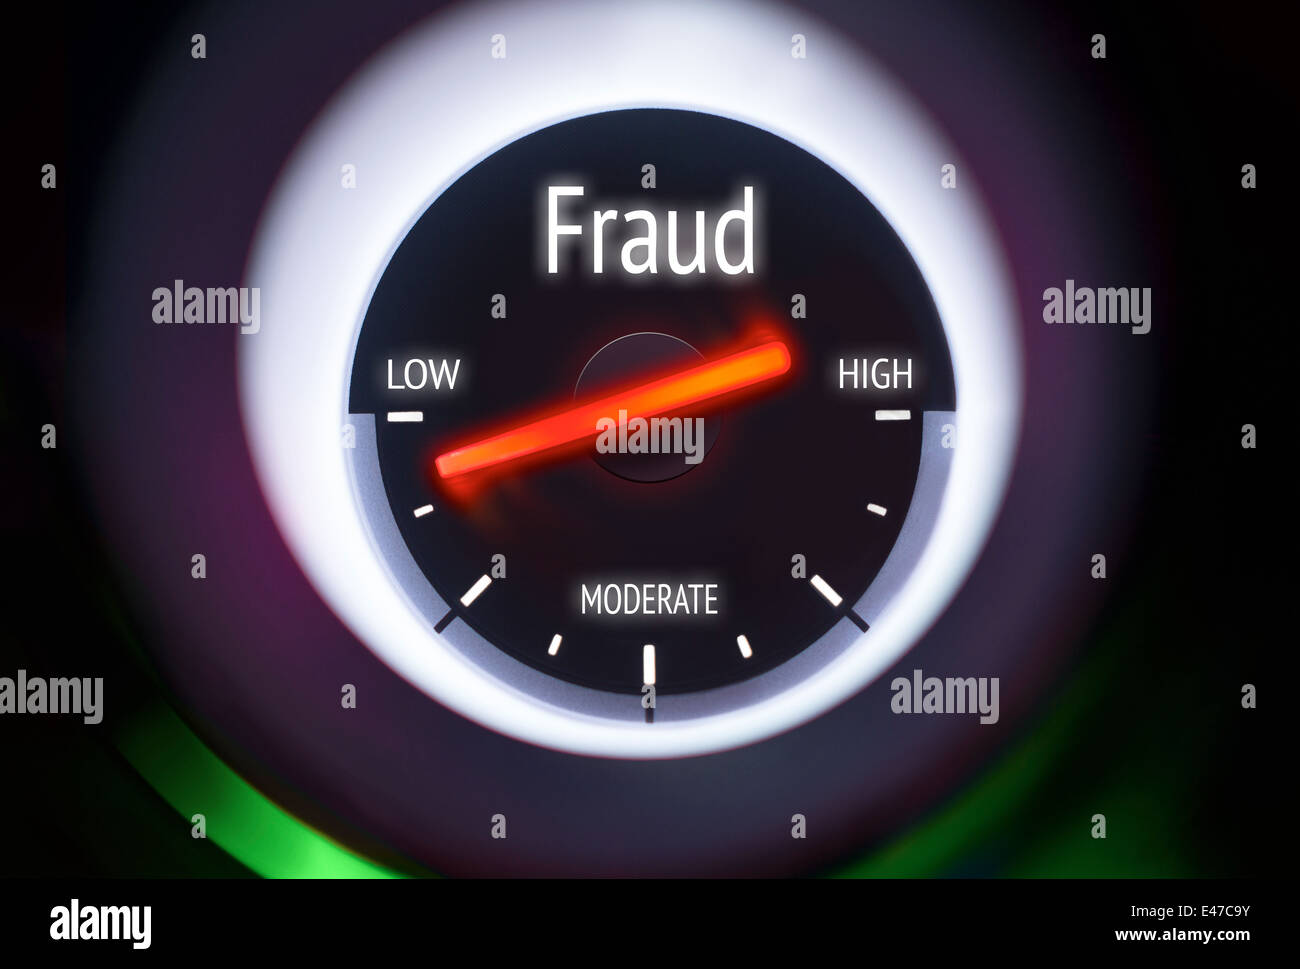 Low Levels of Fraud concept displayed on a gauge Stock Photo